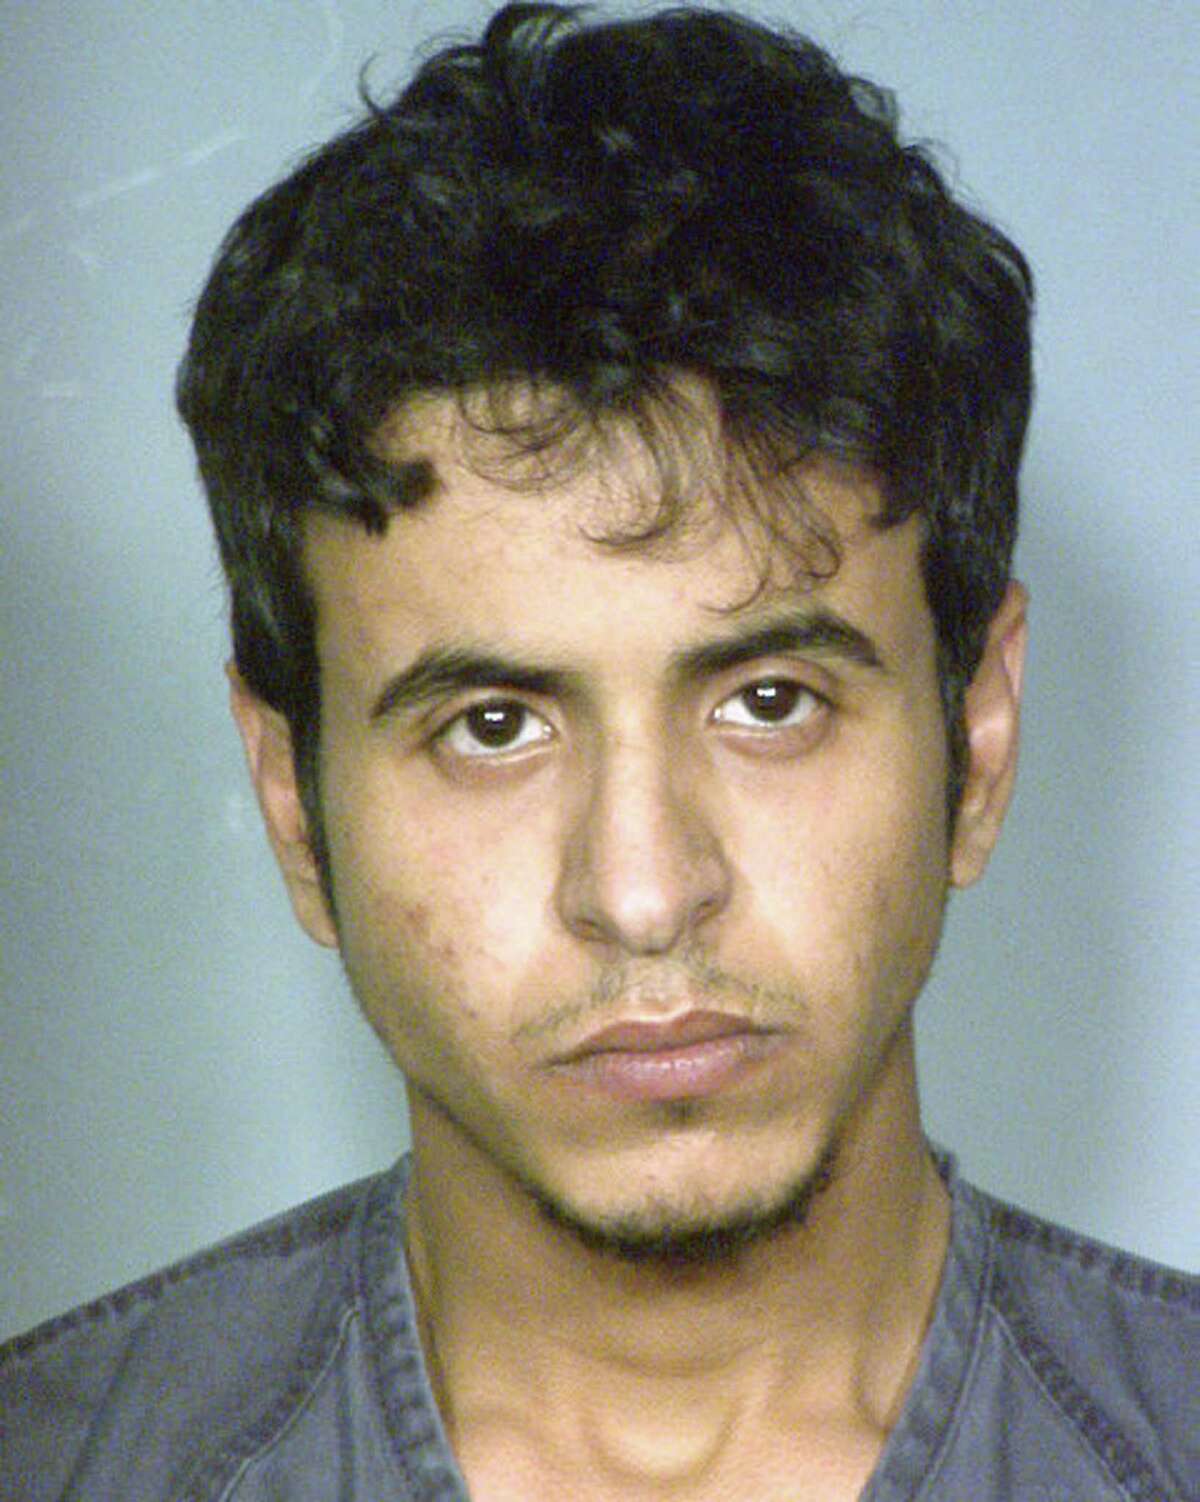 This police booking photo obtained January 4, 2013 courtesy of the Las Vegas Metrpolitan Police Department shows Mazen Alotaibi, a Sergeant in the Saudi Arabian Air Force who was arrested on New Year's Eve for allegedly sexually assaulting a 13-year-old boy in a Las Vegas hotel, police said January 4, 2013. Alotaibi, 23, on holiday in Sin City from training at Lackland Air Force Base in San Antonio, Texas, faces charges of sexual assault with a victim under 16, lewdness with a minor under 14, coercion with force, and first degree kidnapping. Police documents say the incident remains under investigation. AFP PHOTO / LAS VEGAS METROPOLITAN POLICE DEPARTMENT == RESTRICTED TO EDITORIAL USE / MANDATORY CREDIT: "AFP PHOTO / LAS VEGAS METROPOLITAN POLICE DEPARTMENT" / NO SALES / NO MARKETING / NO ADVERTISING CAMPAIGNS / DISTRIBUTED AS A SERVICE TO CLIENTS ==-/AFP/Getty Images